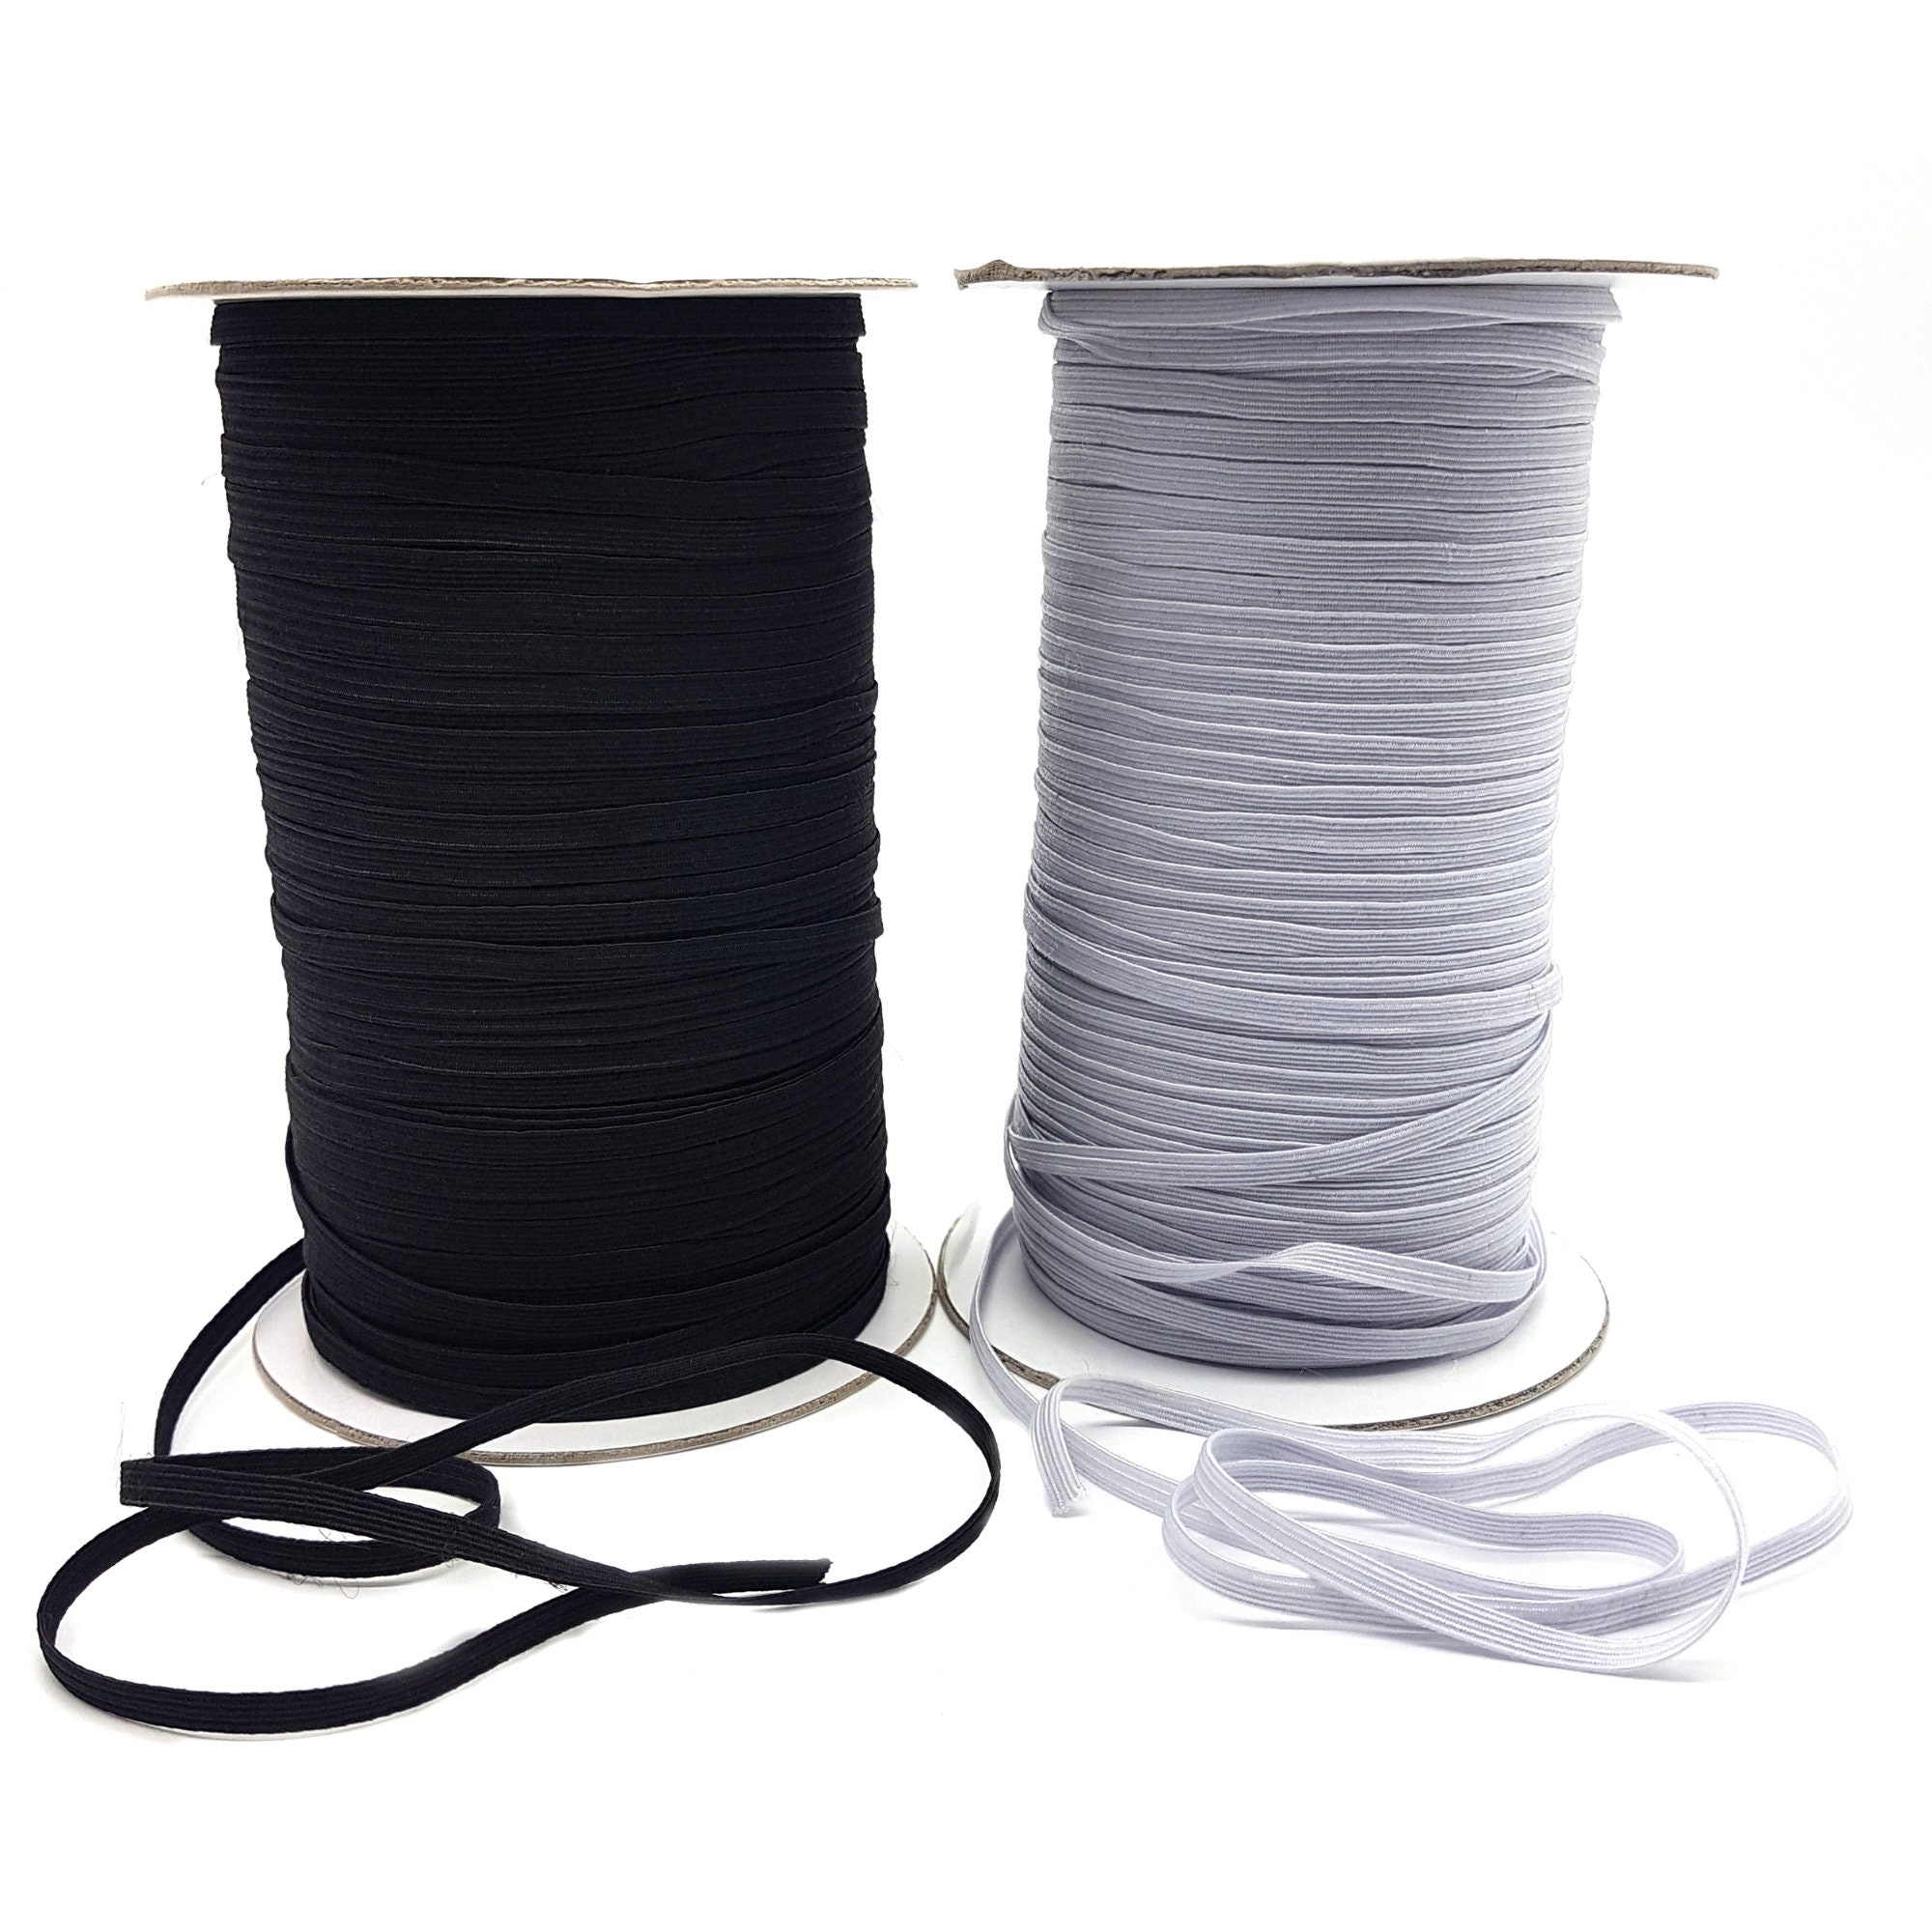 Flat Elastic Cord 10mm for Sewing Crafts Dressmaking Tailoring Facemasks 